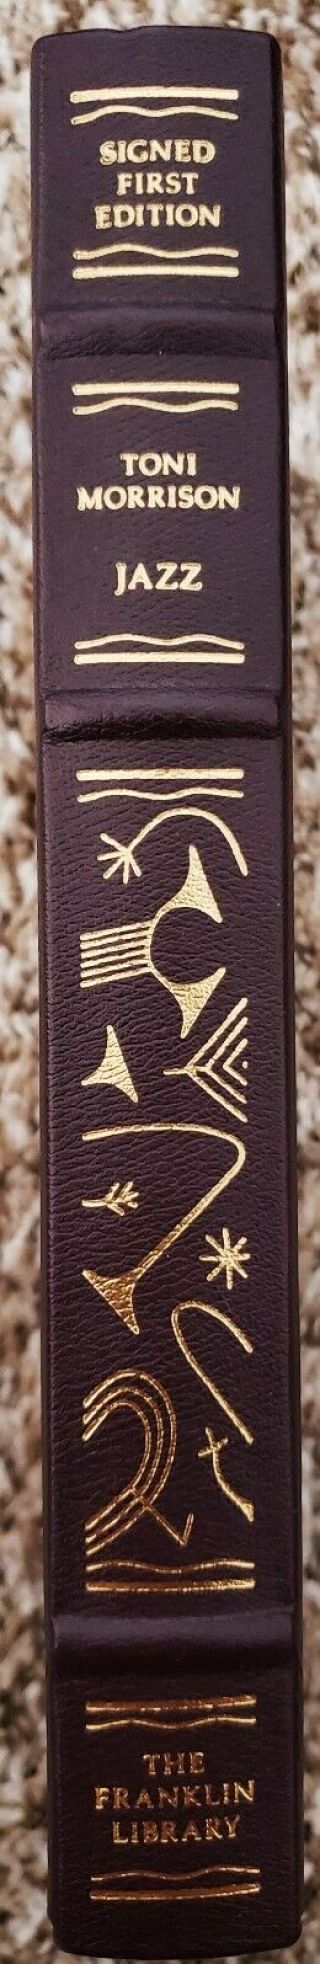 Franklin Library Jazz Toni Morrison Signed First Edition Leather 2